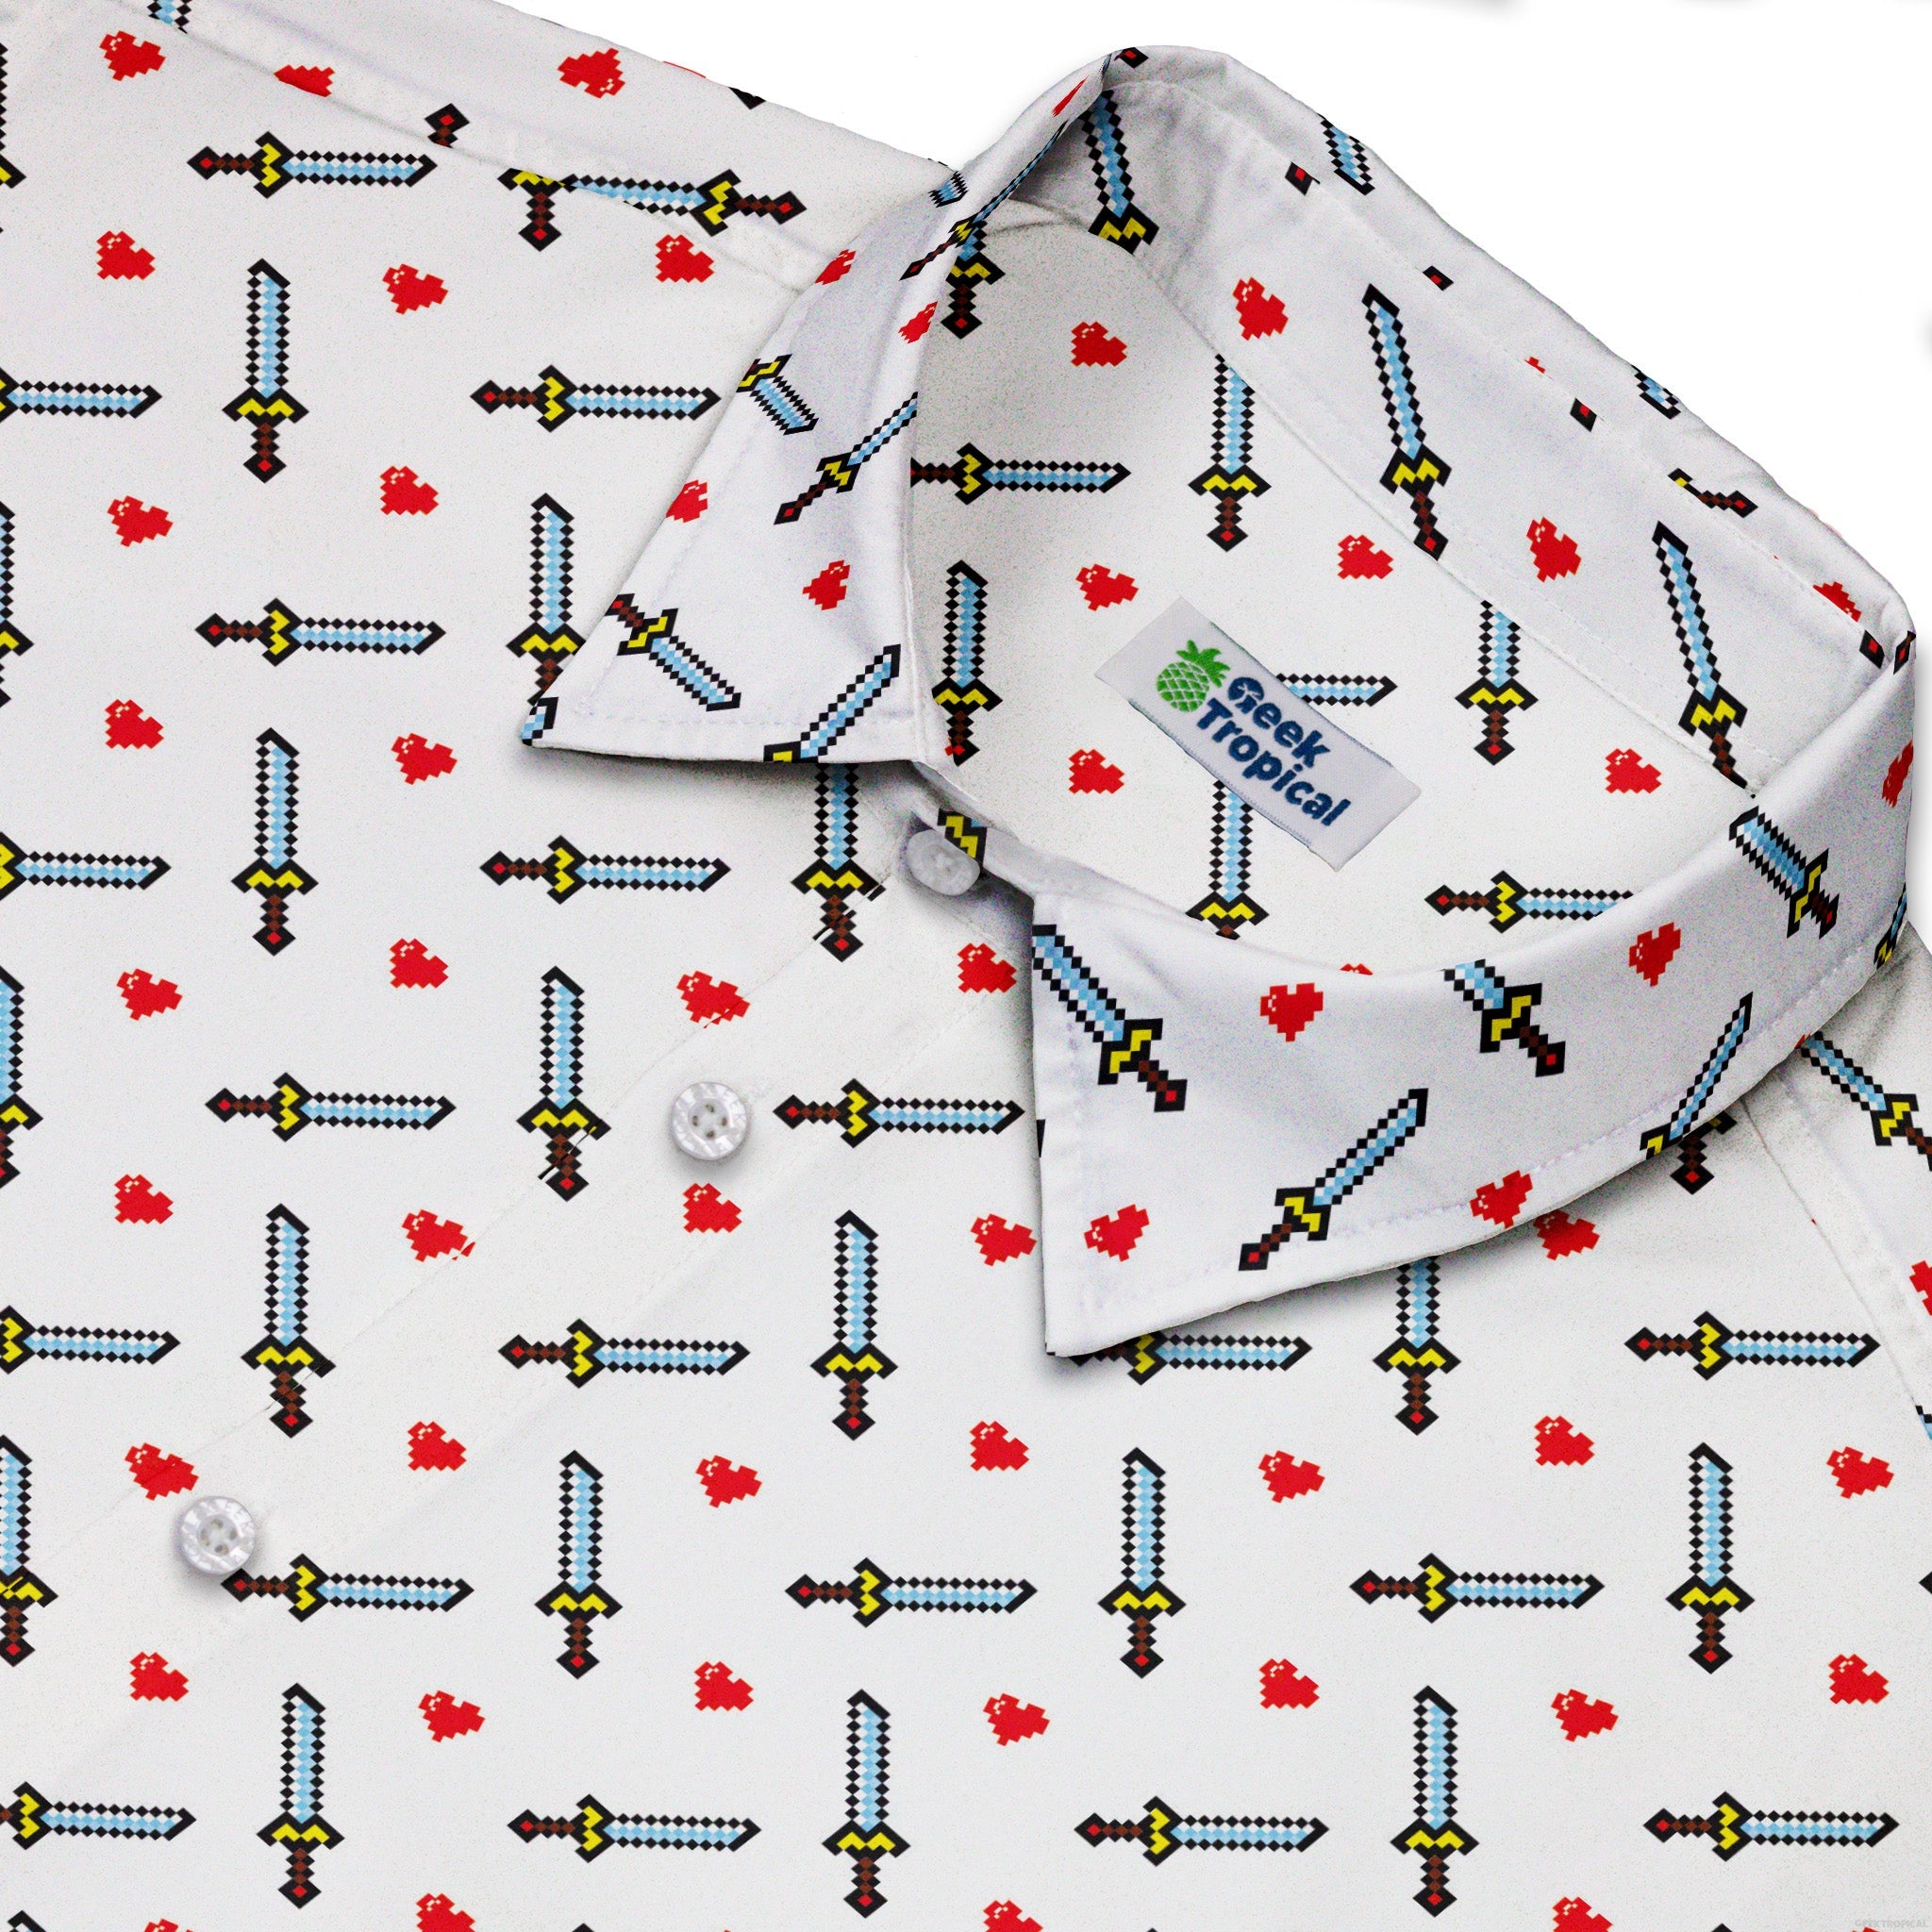 Sword and Hearts Video Game Button Up Shirt - adult sizing - Design by Heather Davenport - Simple Patterns